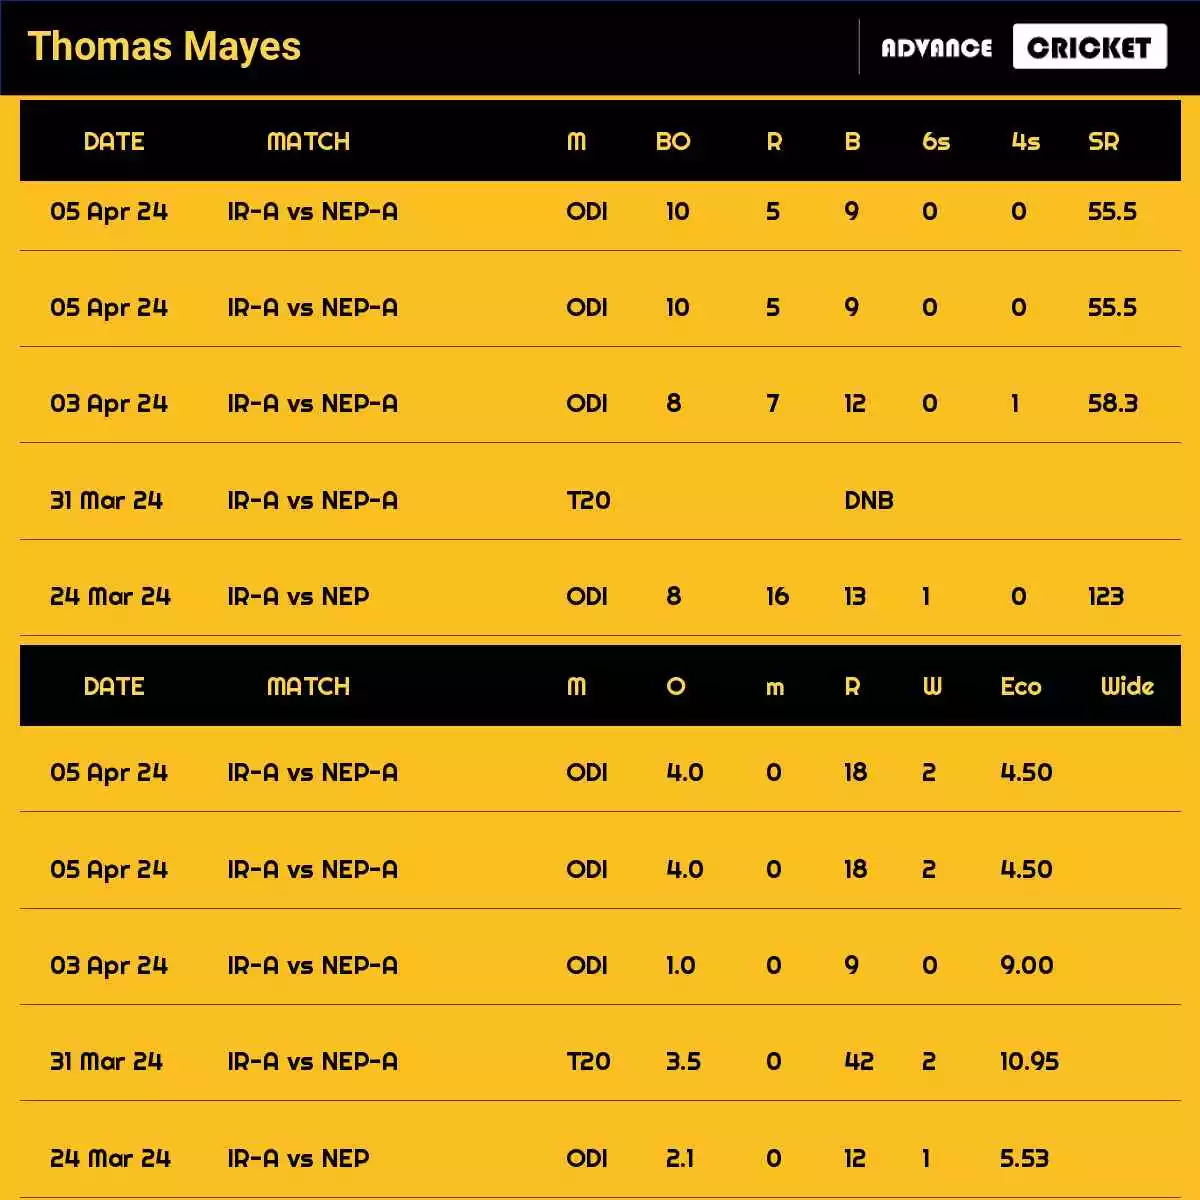 Thomas Mayes Recent Matches Details Date Wise